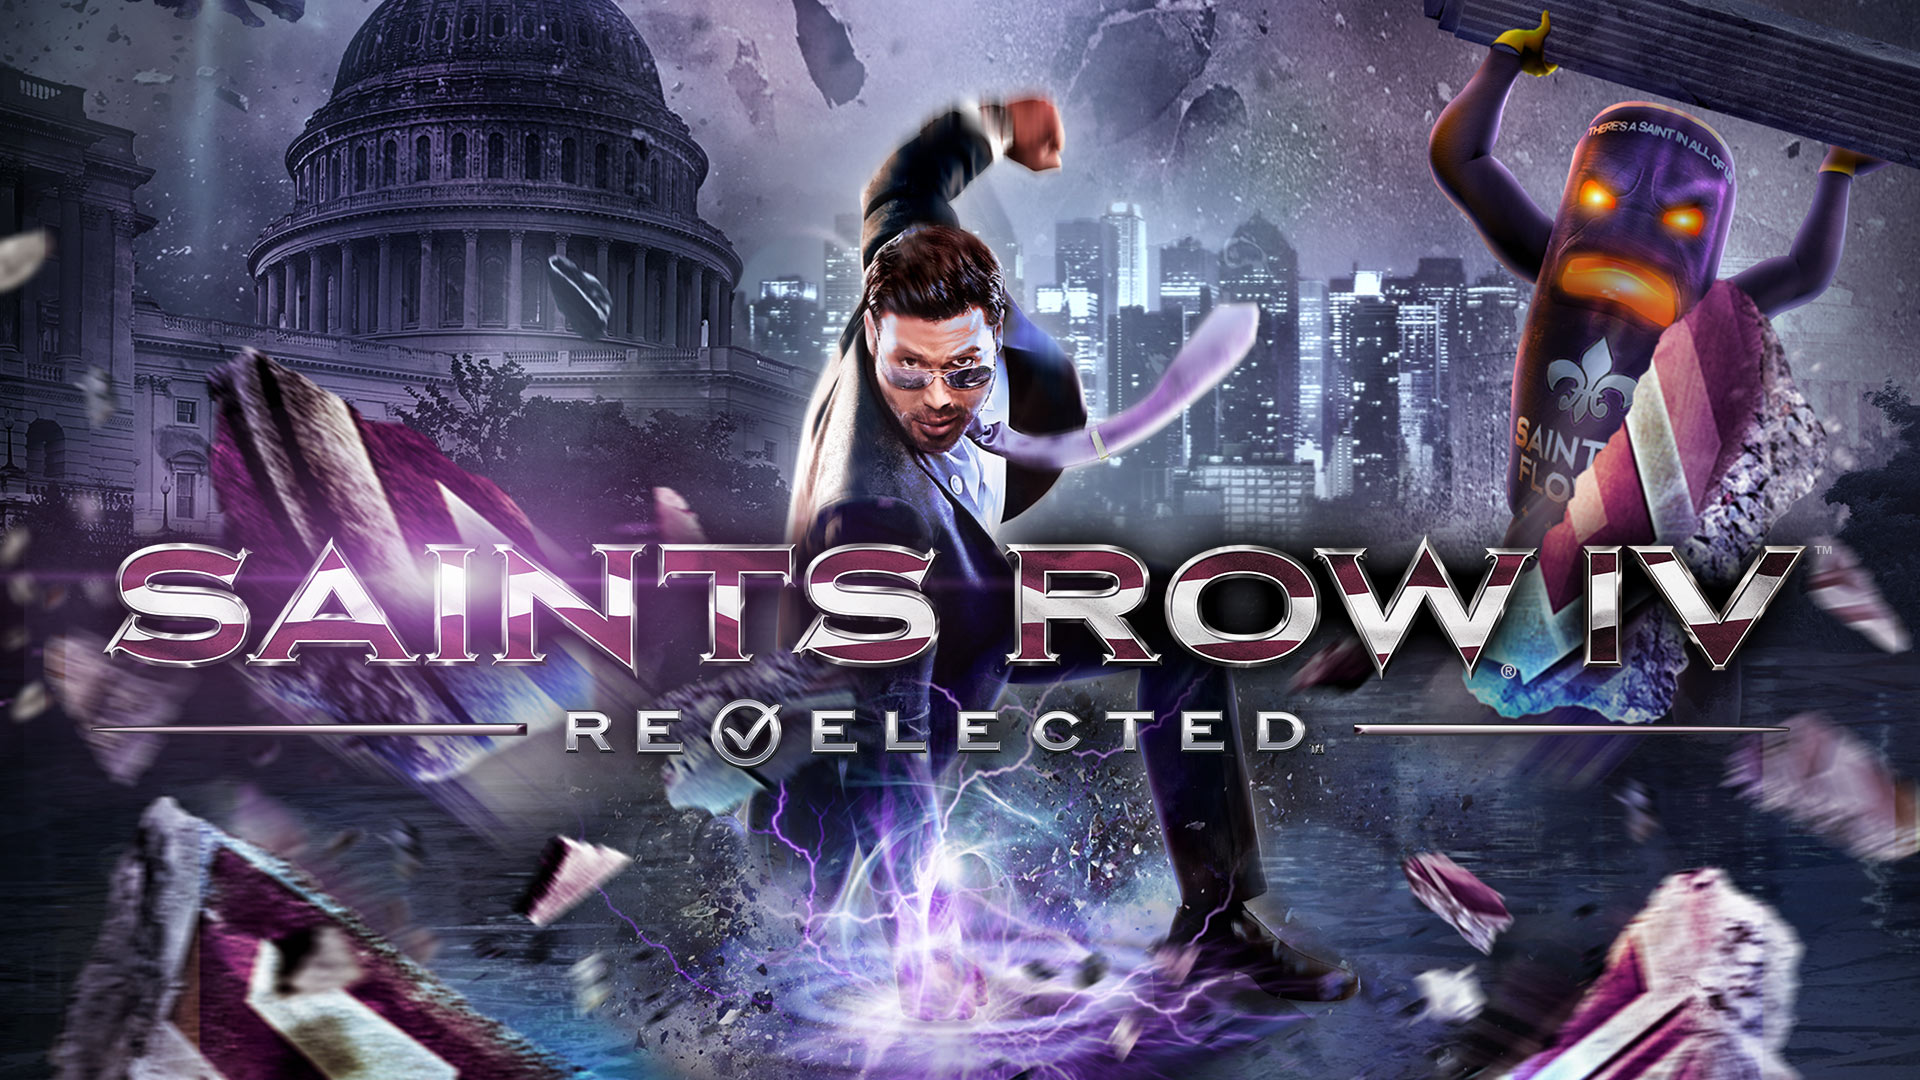 Saints Row IV®: Re-Elected™ for Nintendo Switch - Nintendo Game Details $2.79